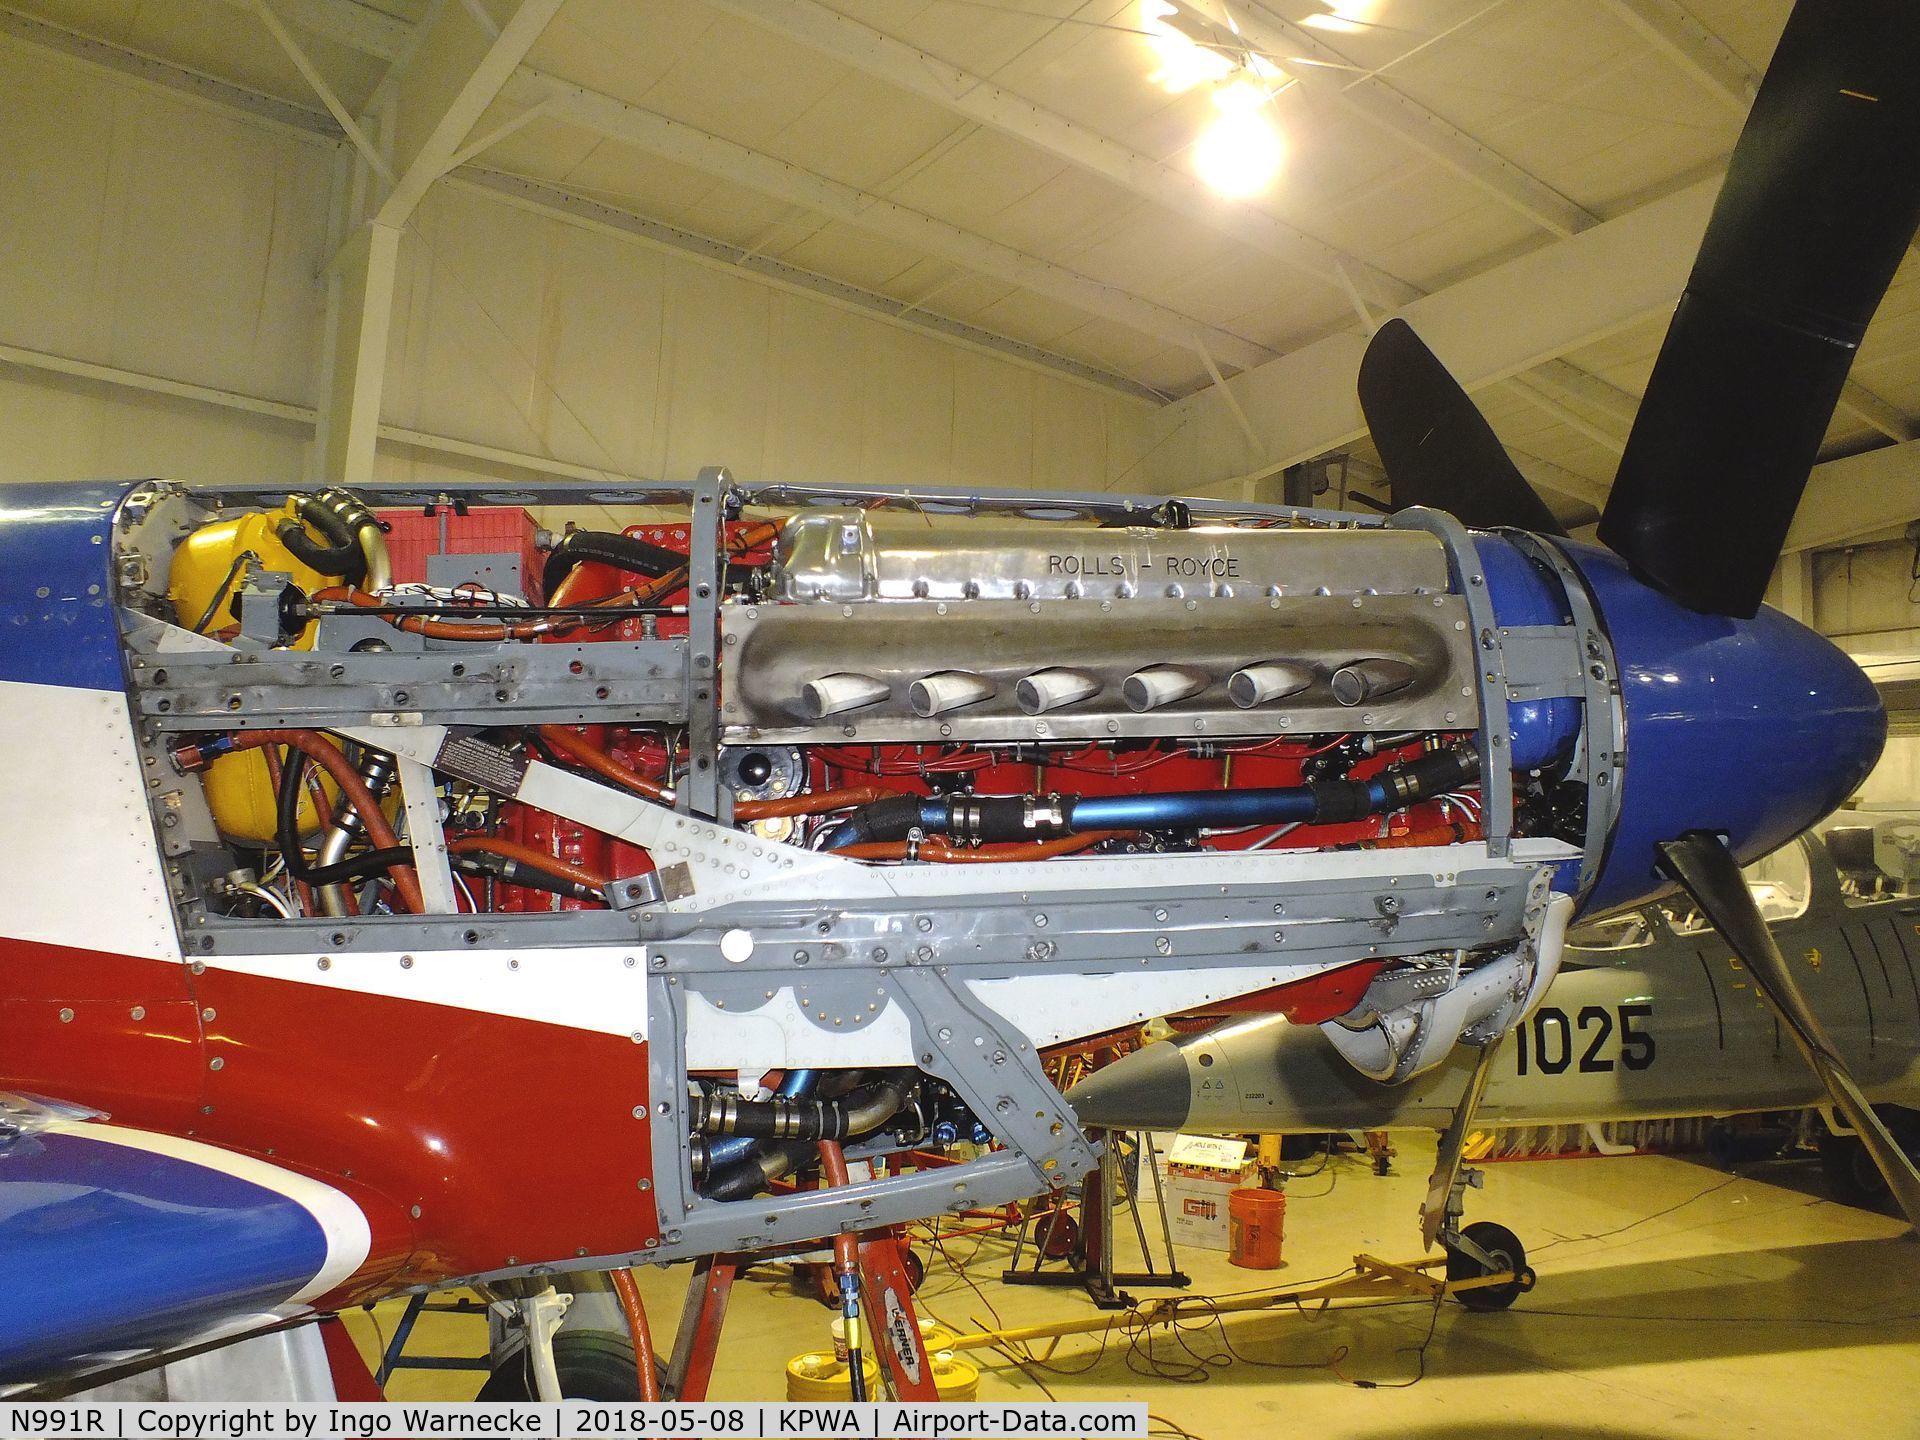 N991R, 1993 North American P-51D Mustang C/N 122-41076, North American P-51D Mustang racer 'Miss America' undergoing maintenance at the Oklahoma Museum of Flying, Oklahoma City OK